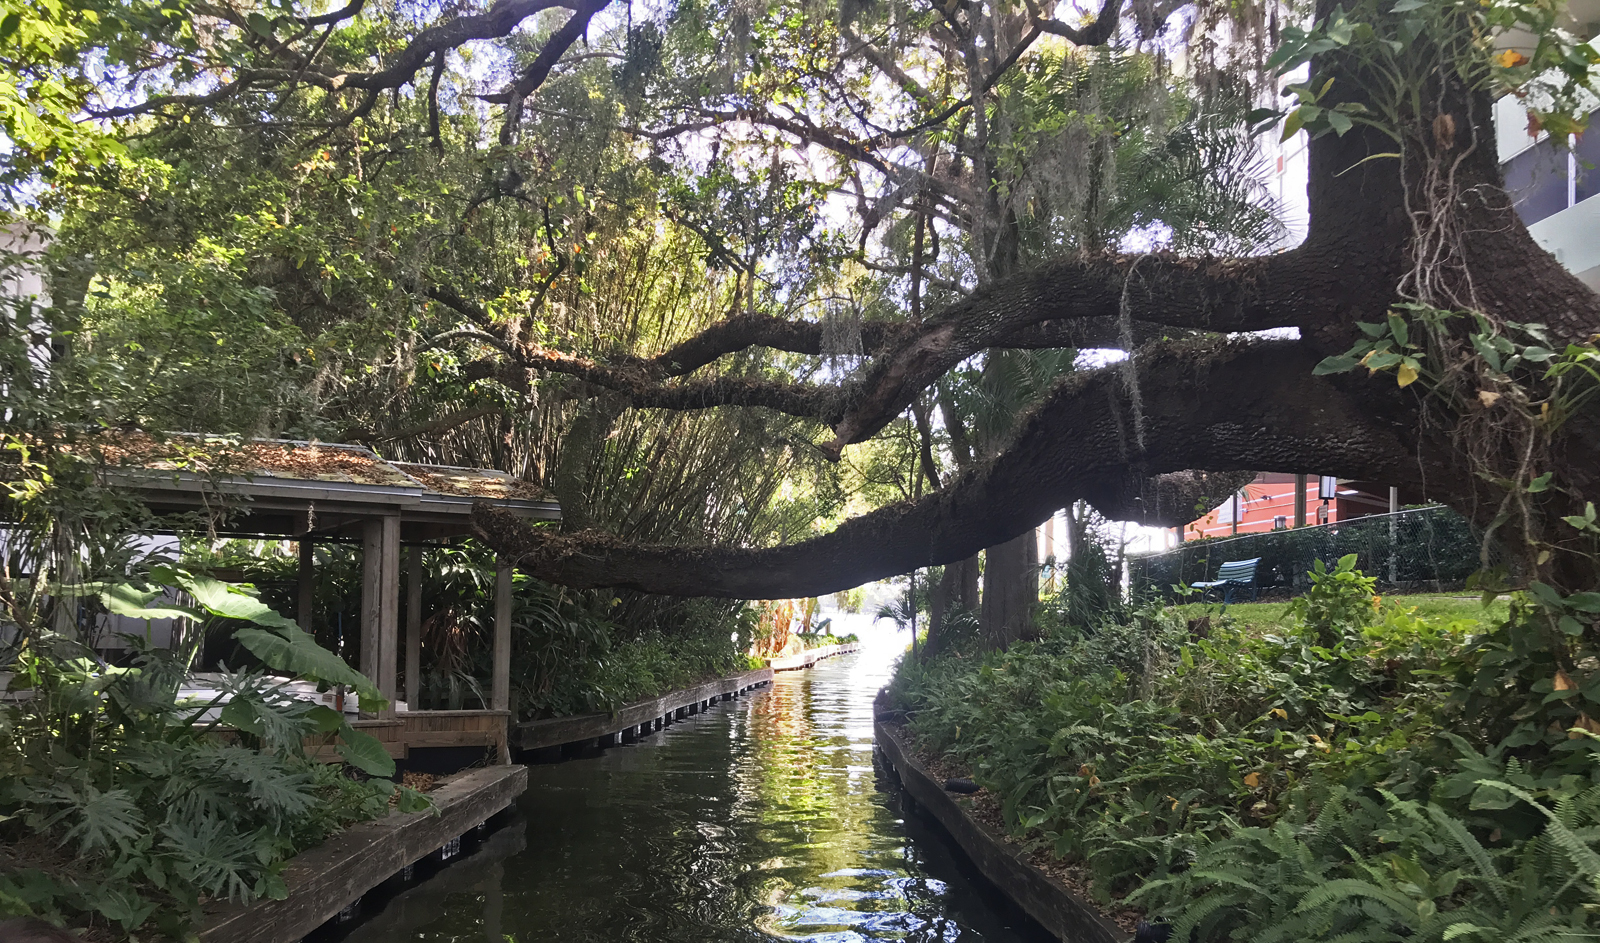 Things to do in Winter Park: The Winter Park Scenic Boat Tour takes you through narrow canals that connect the lakes. (Photo: Bonnie Gross)